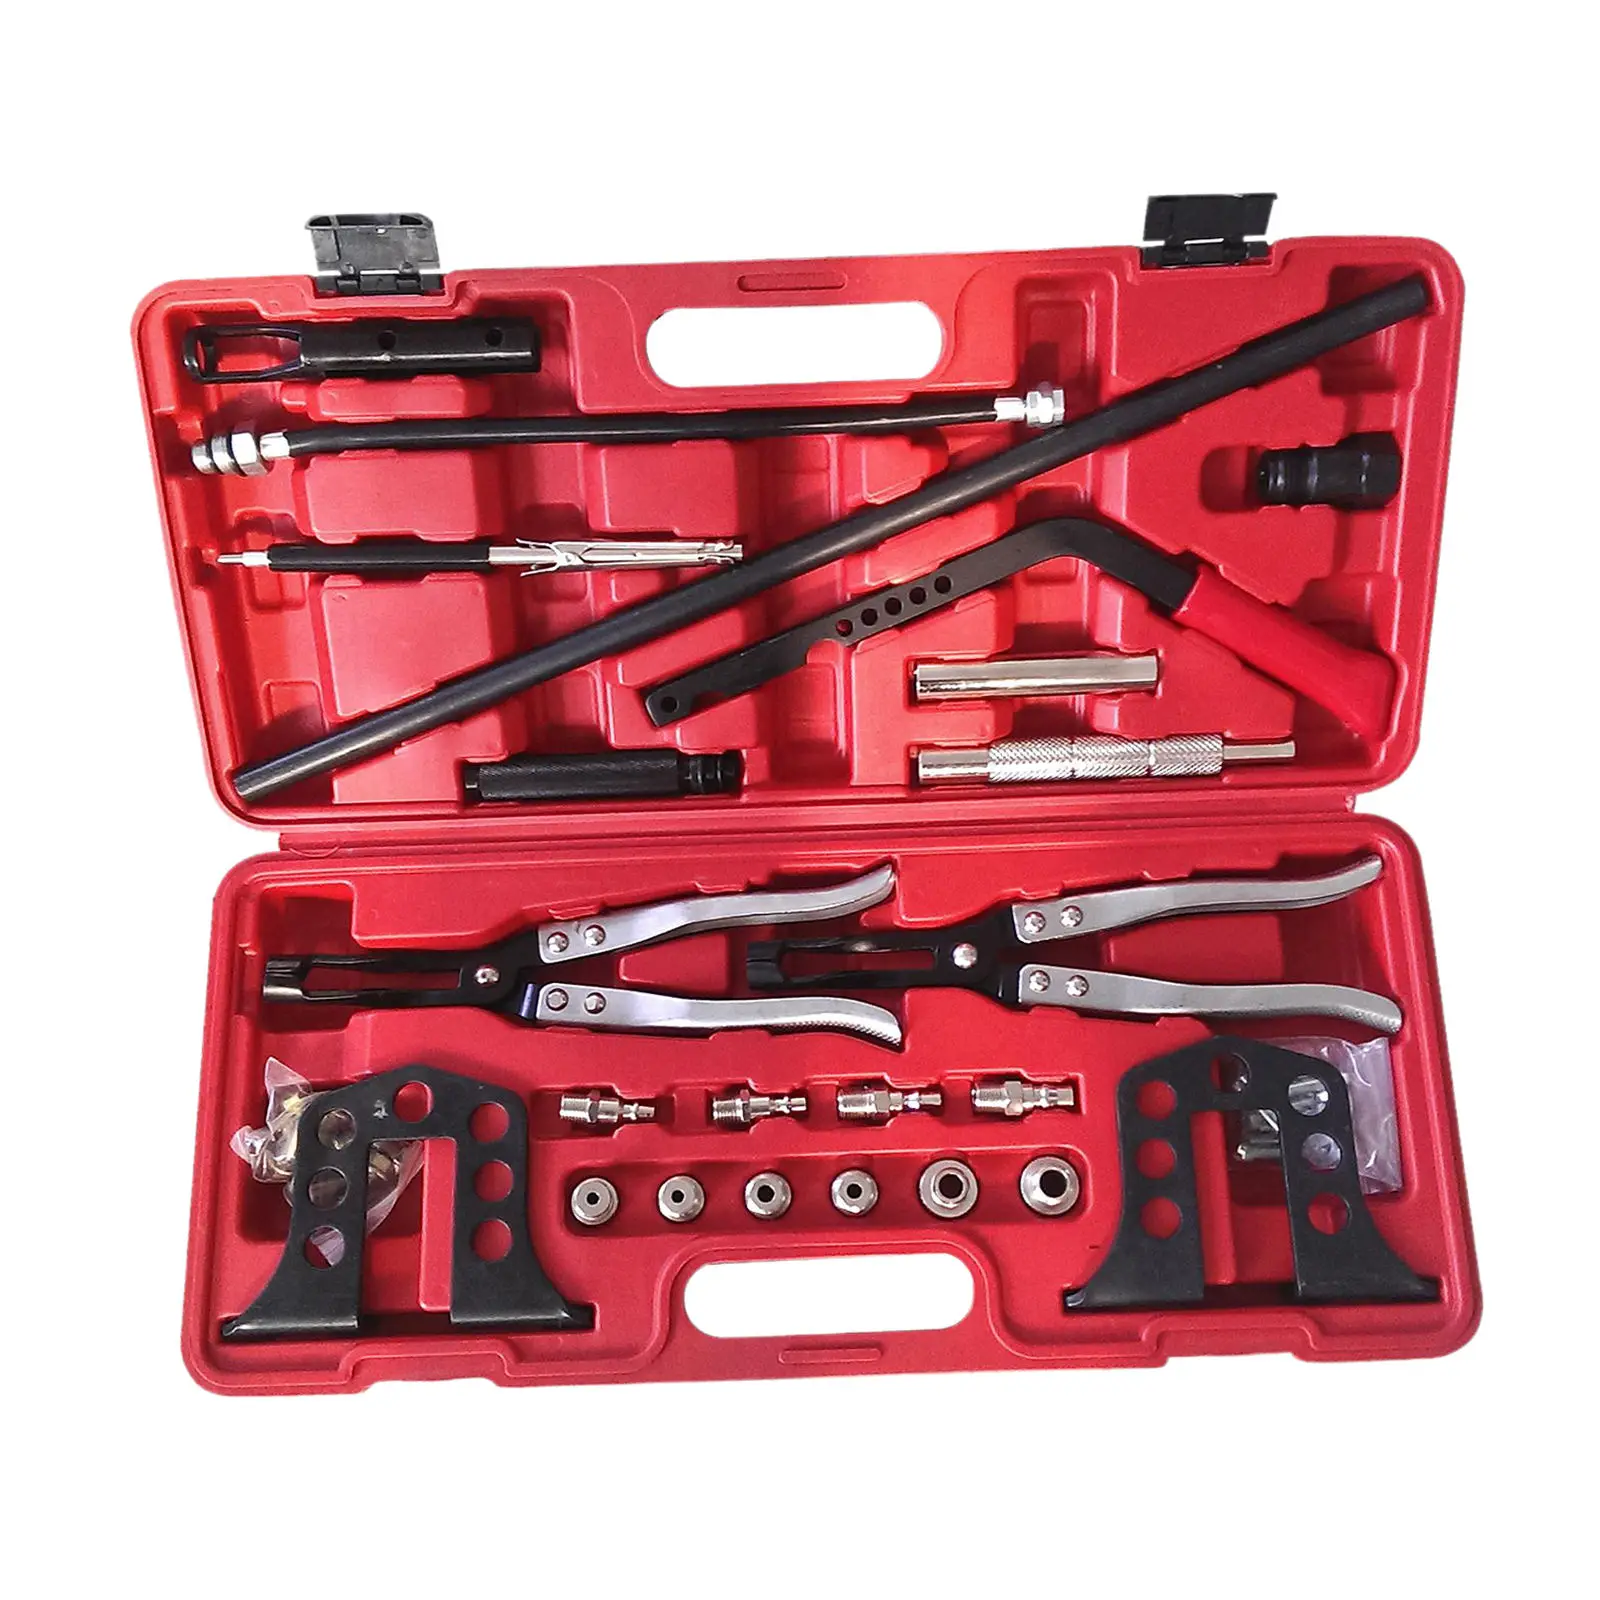 Pro Cylinder Head Service Tool, For Valve Springs Guides Bushes Stem Seals Set, Fit for 8 16 and 24 Valve Engines Tools